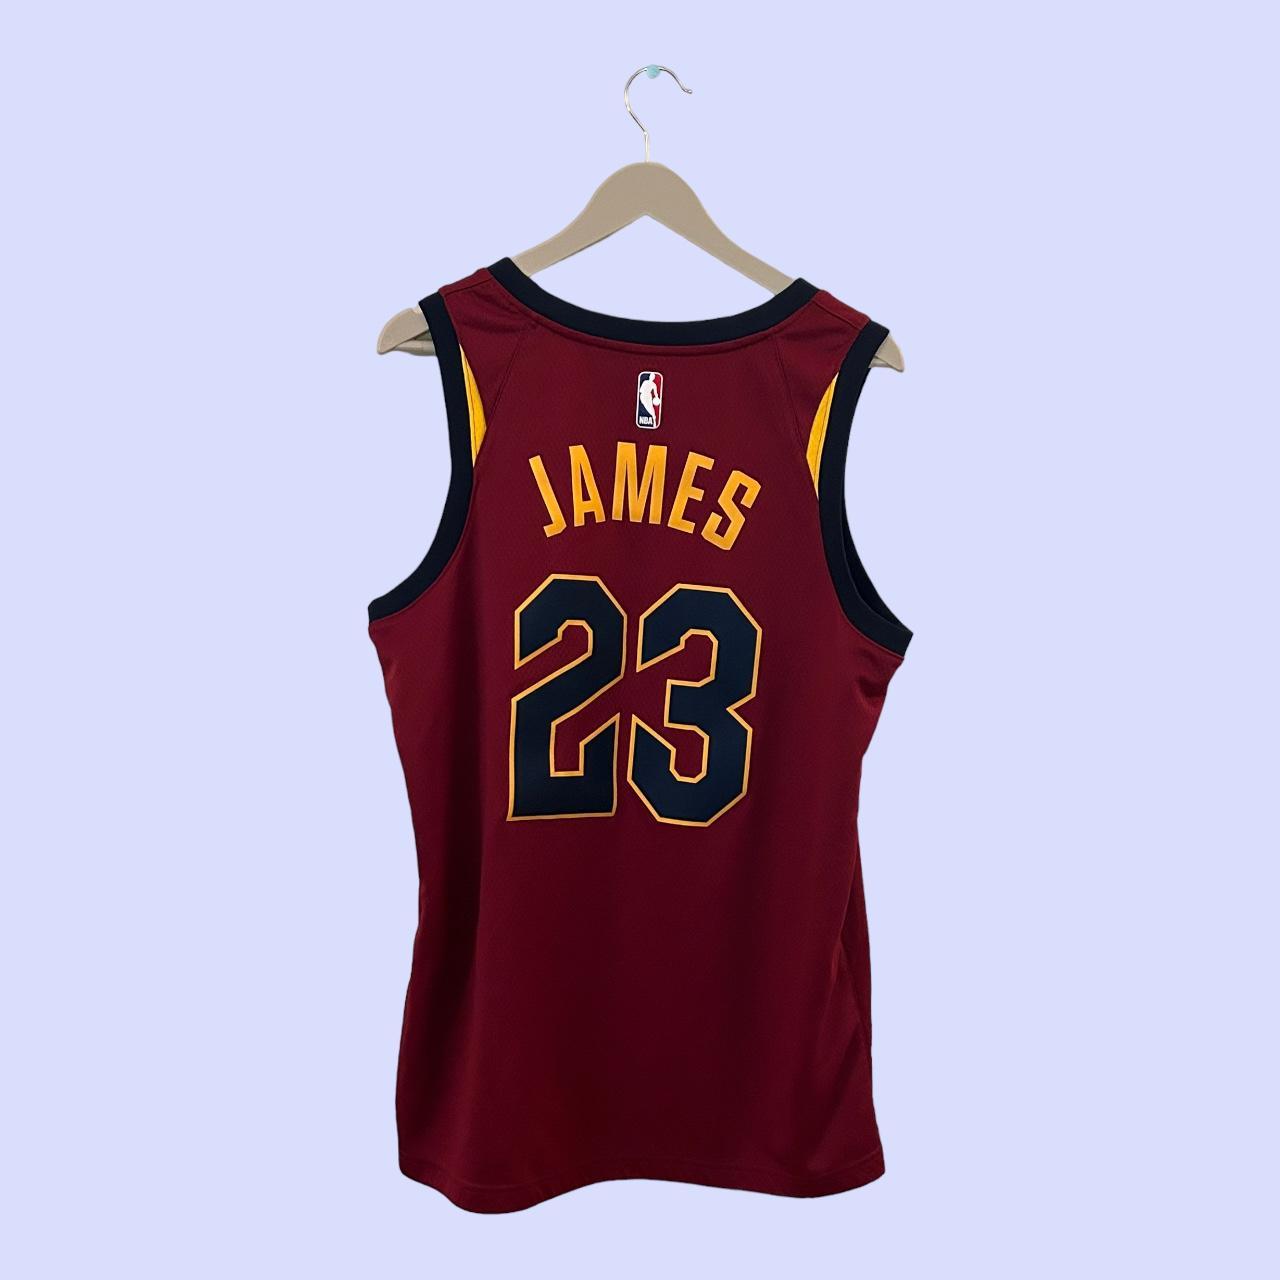 LeBron James Cleveland Cavaliers Blue Throwback Basketball Jersey